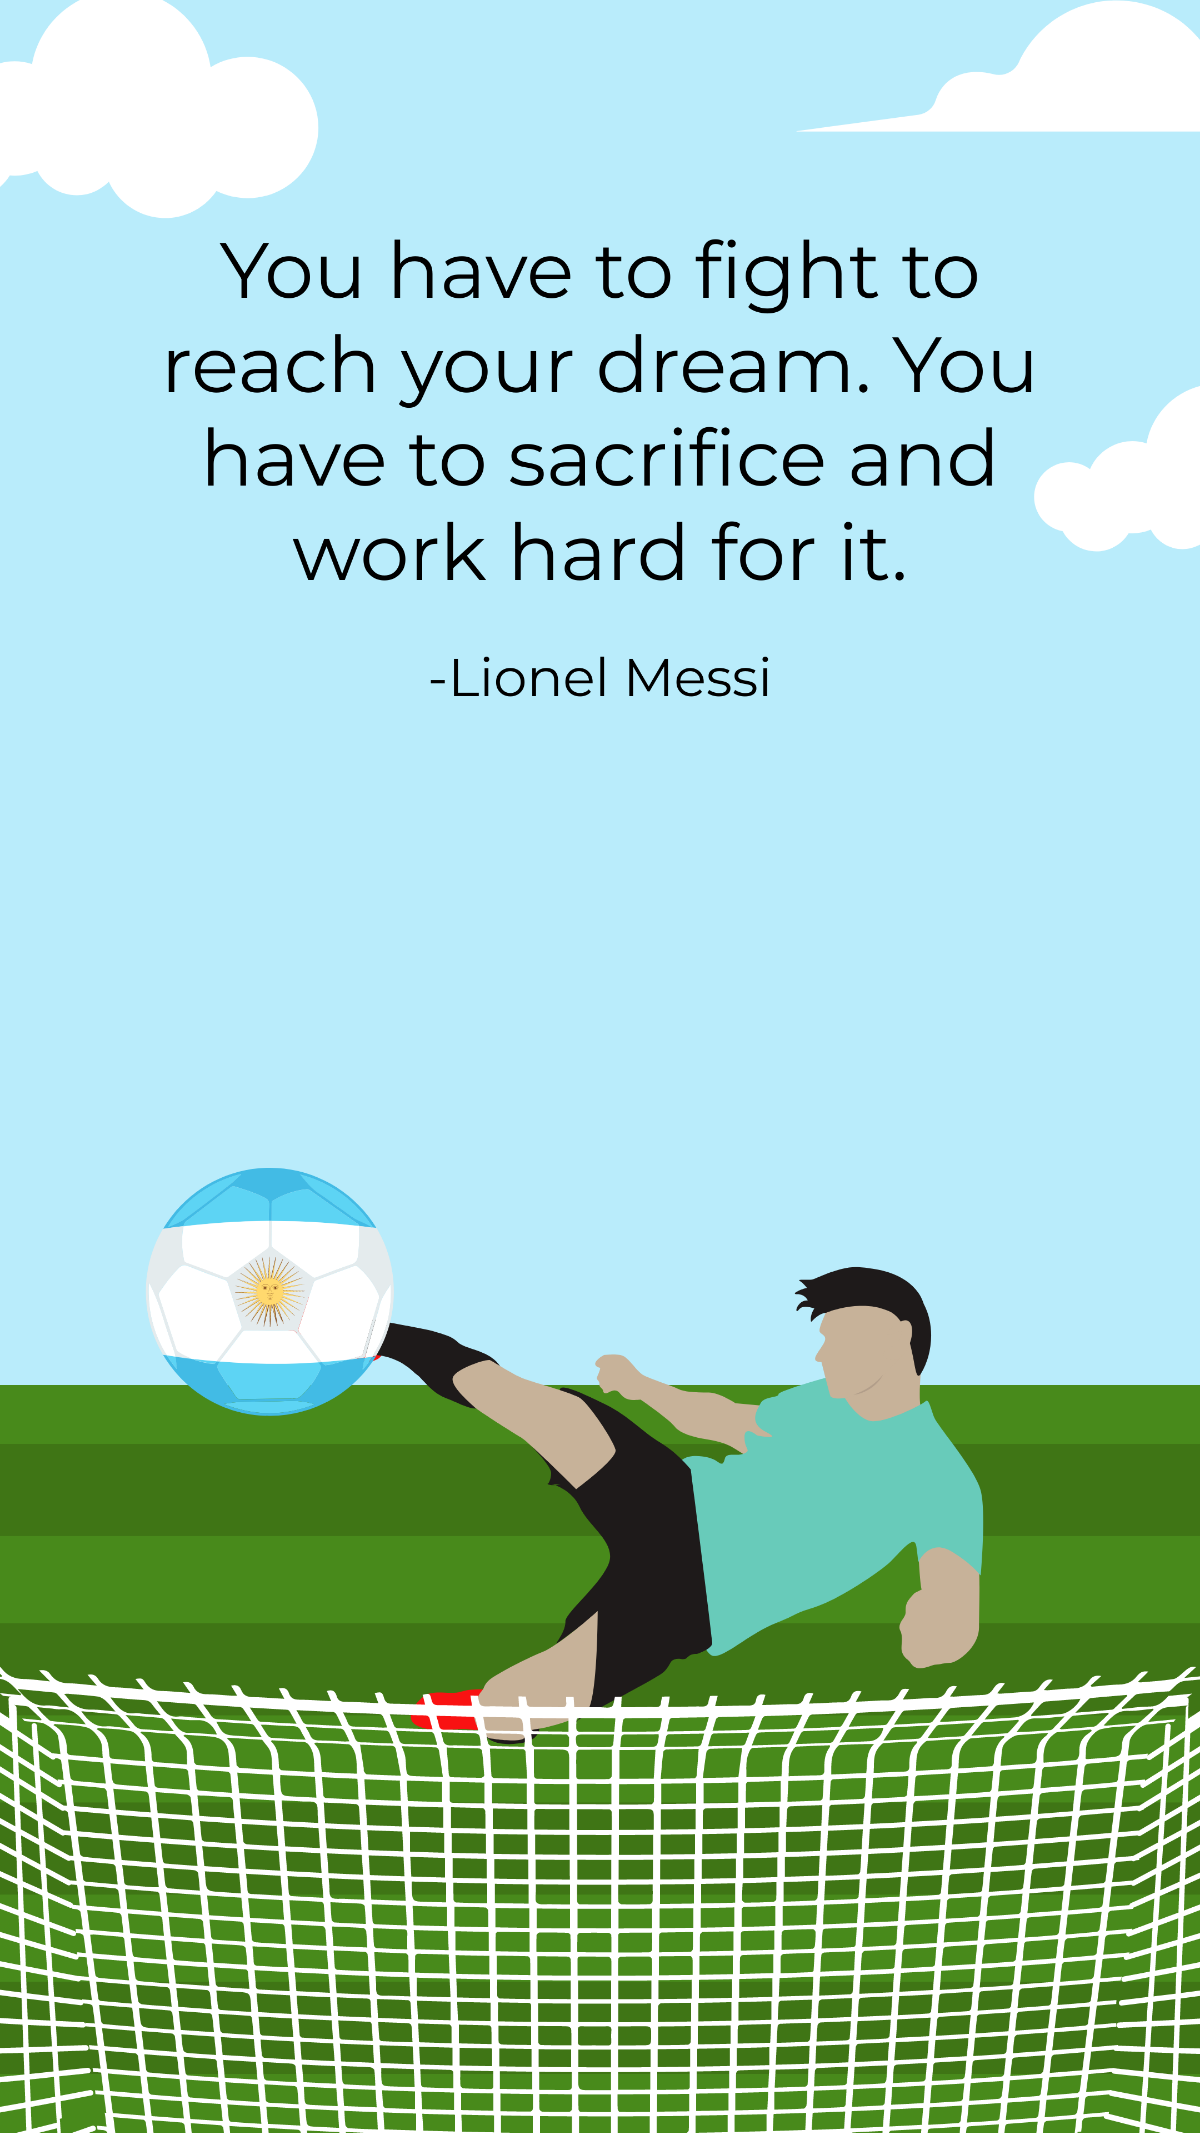 Lionel Messi - You have to fight to reach your dream. You have to sacrifice and work hard for it. Template